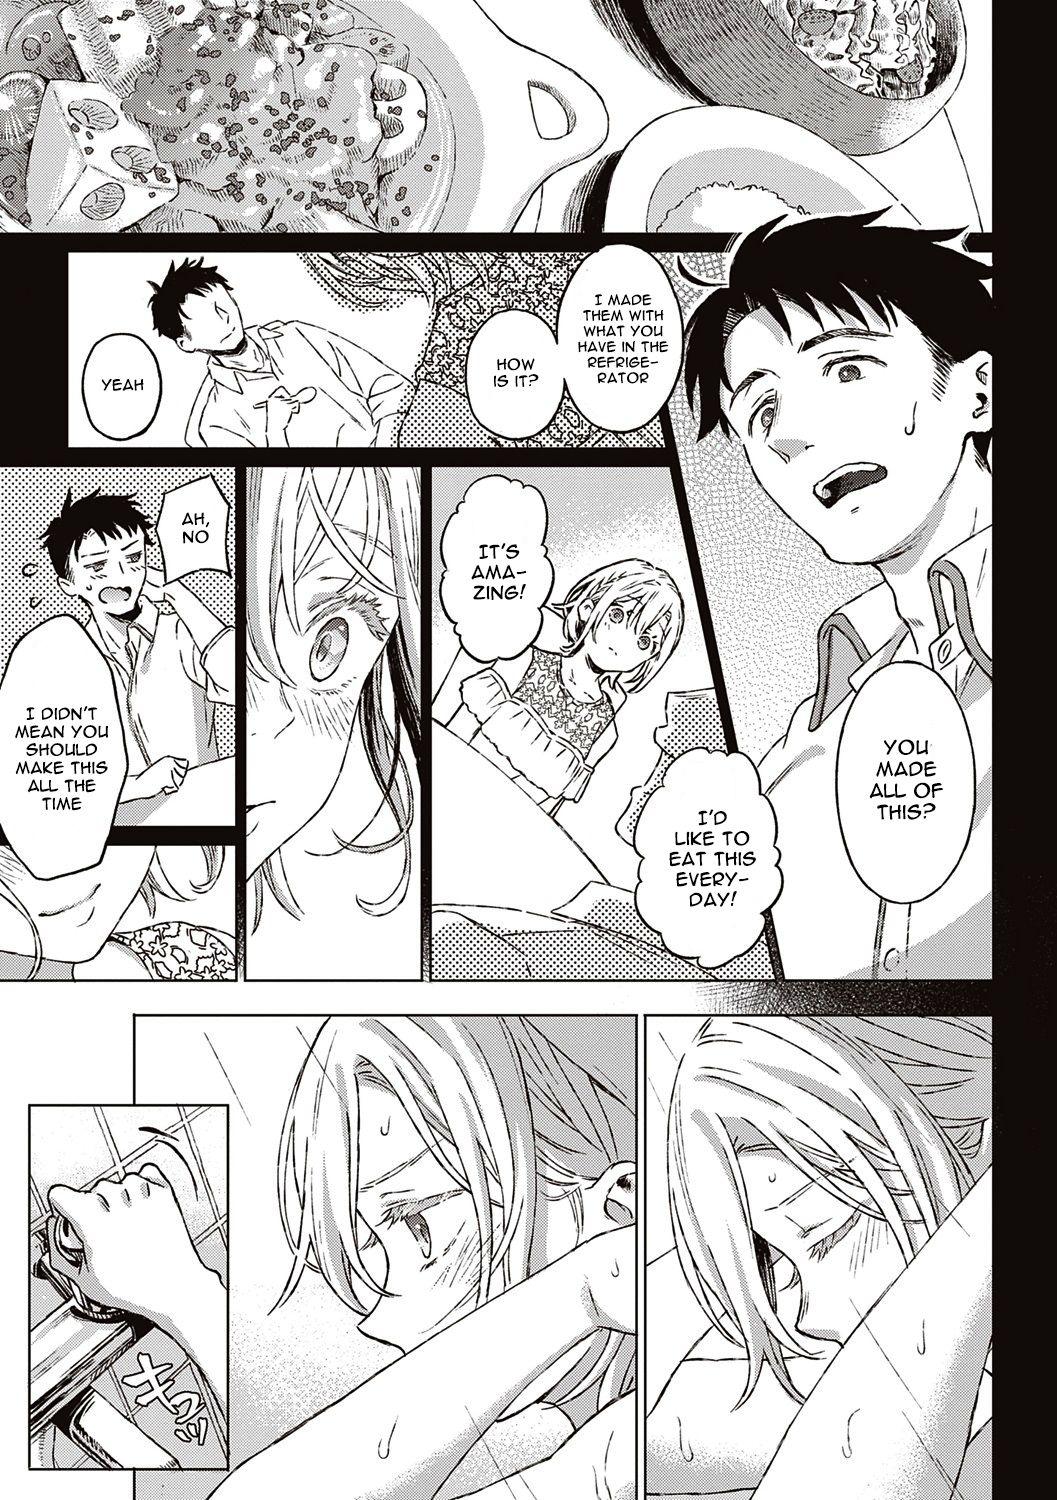 Lesbo Shinsou no Hanayome + After Story | Closeted Bride + After Story Teasing - Page 11